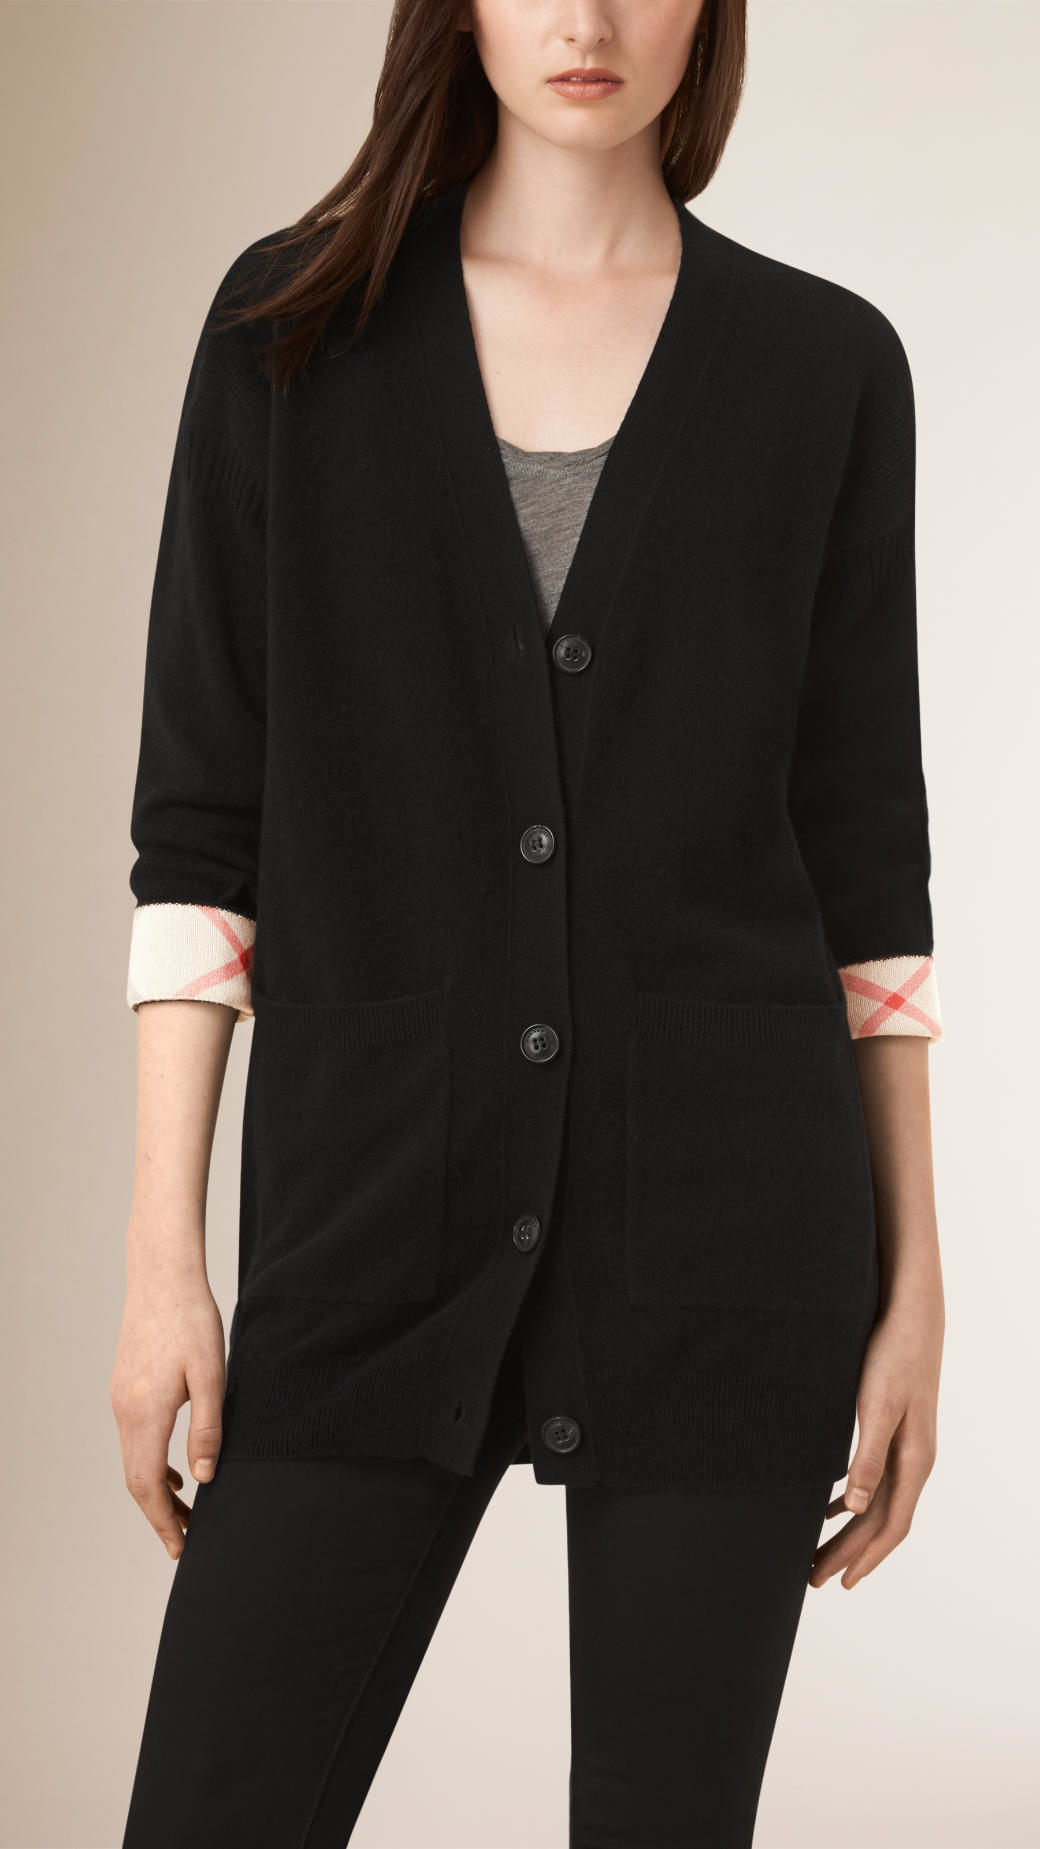 Lyst - Burberry Oversized Cashmere Cardigan in Black